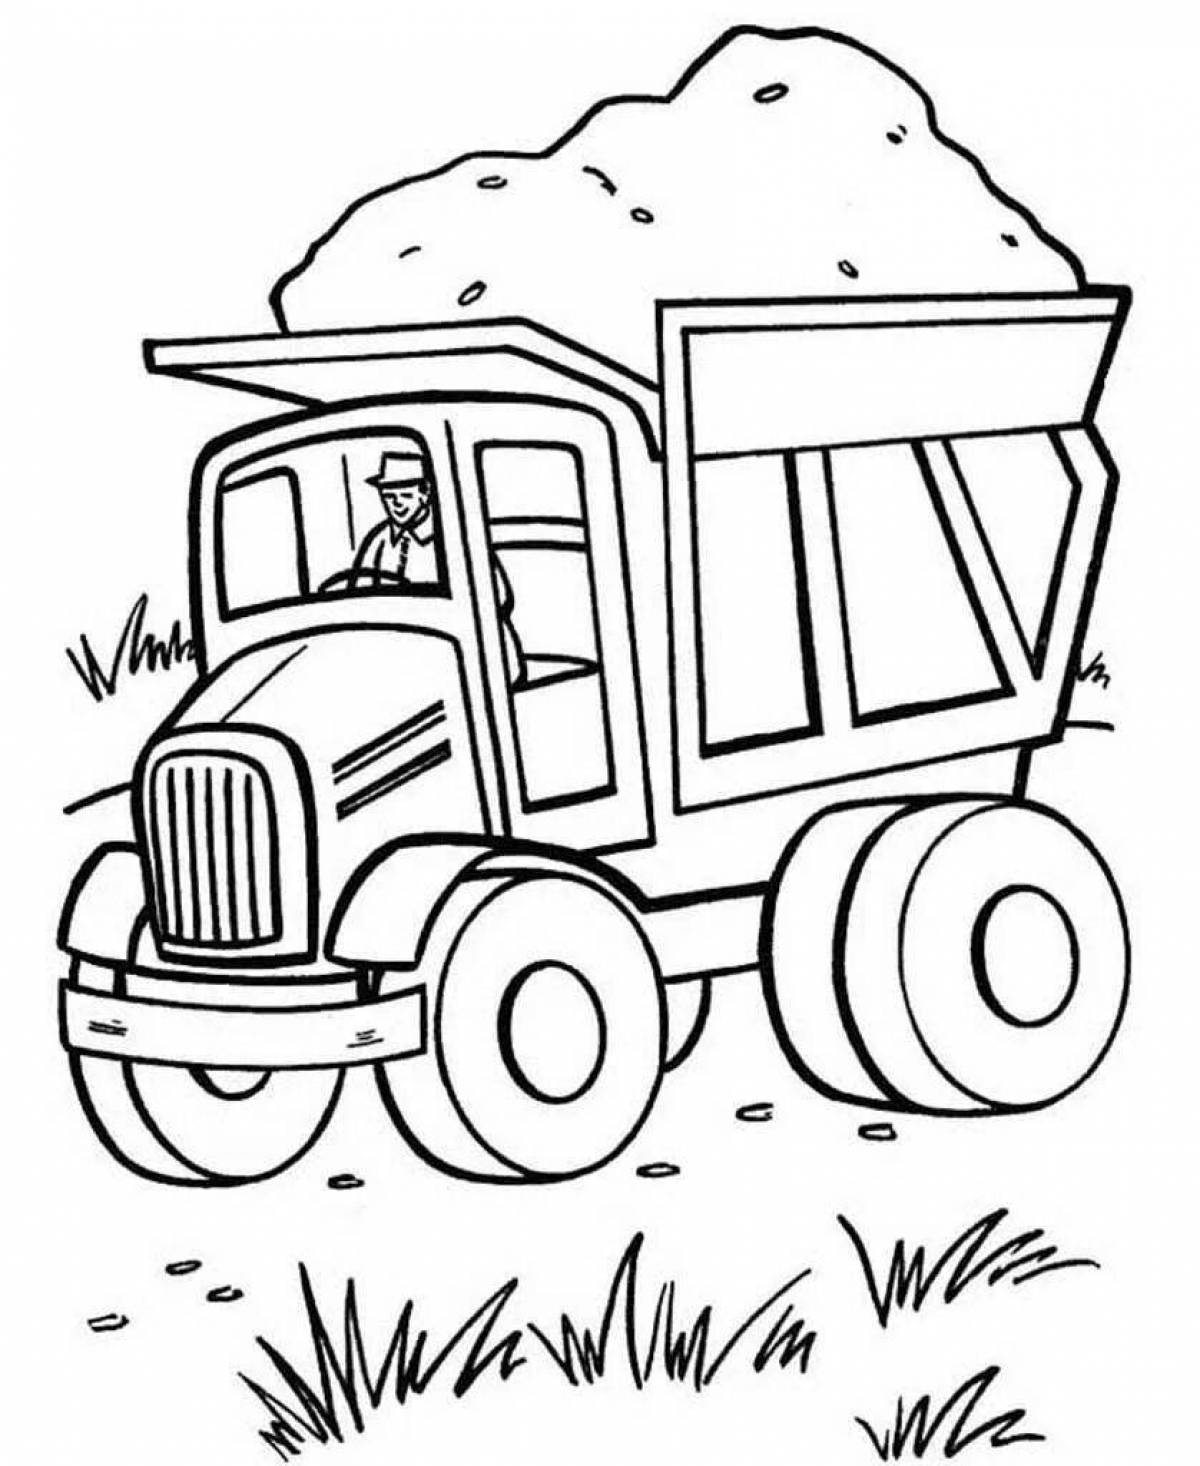 Adorable truck coloring page for 5-6 year olds